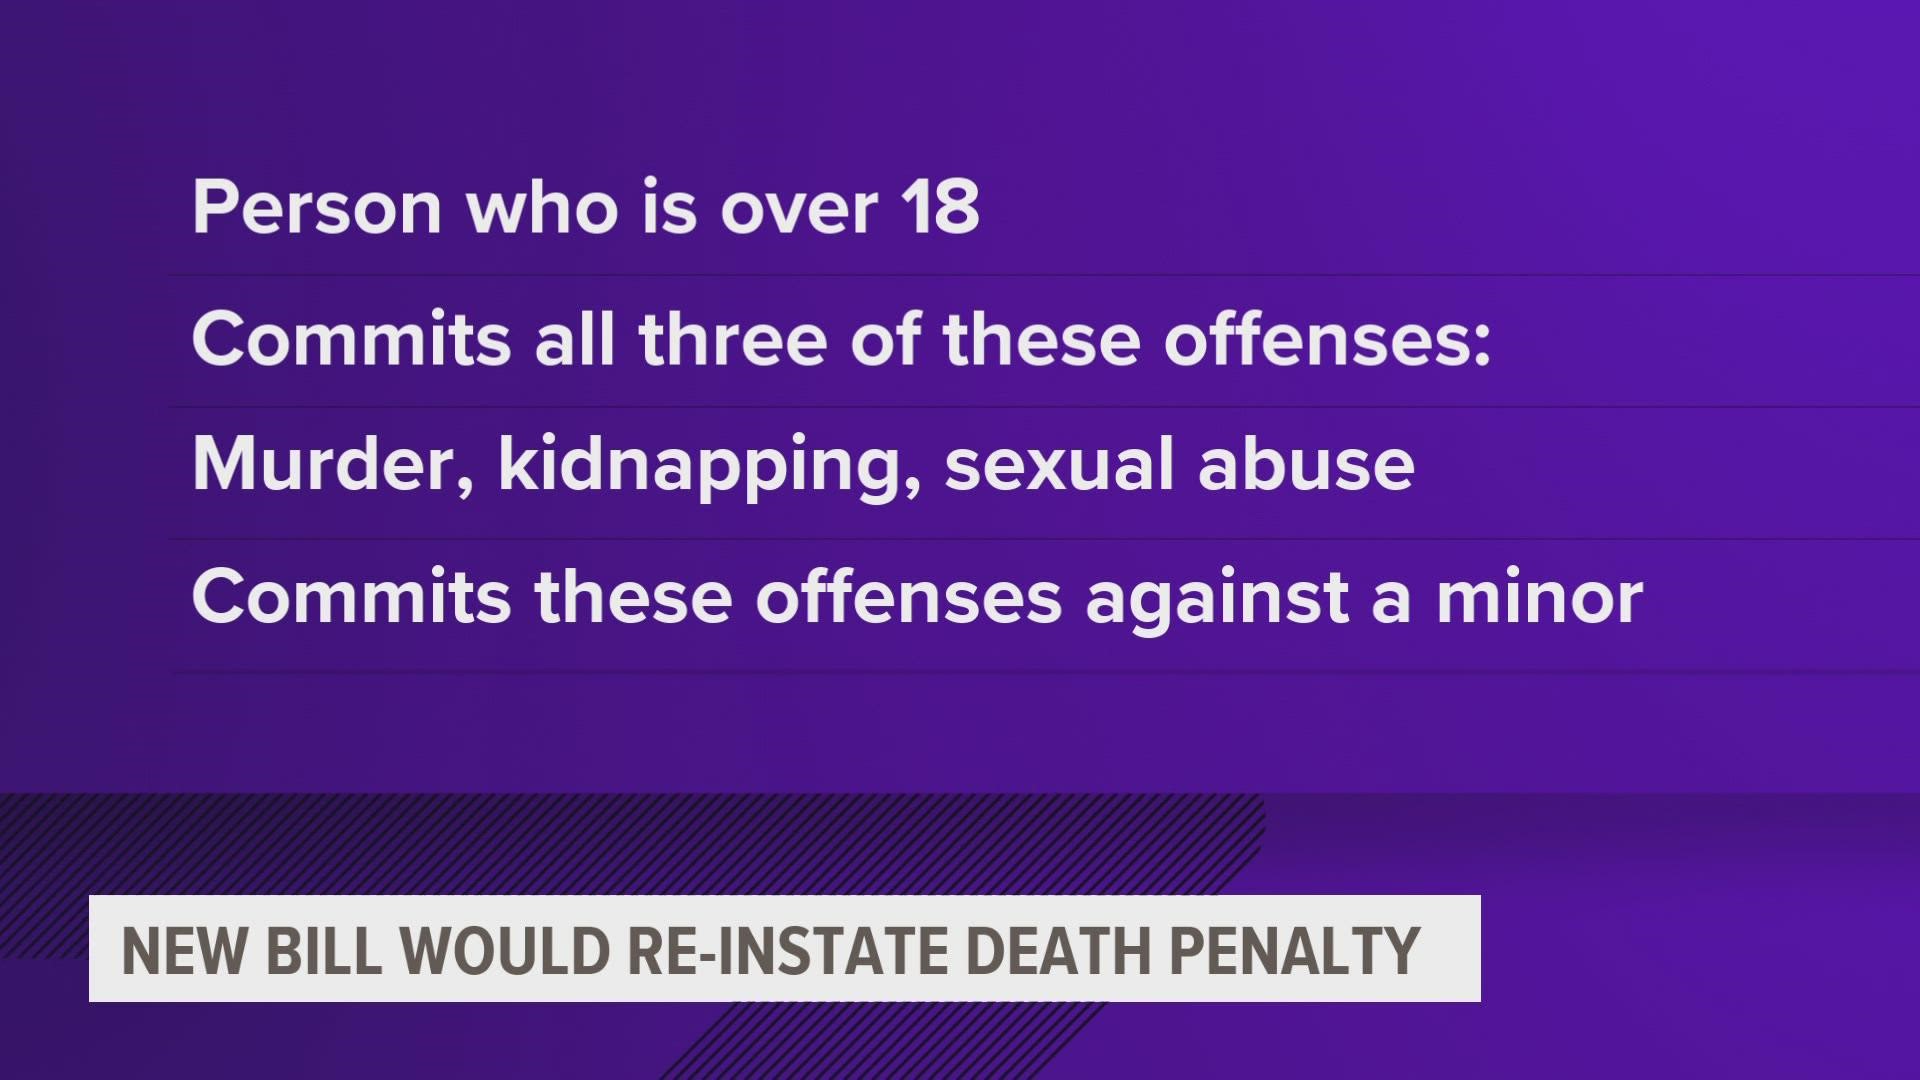 The bill would establish the death penalty for a person who is 18 or older and commits the following offenses against a minor: murder, kidnapping or sexual abuse.